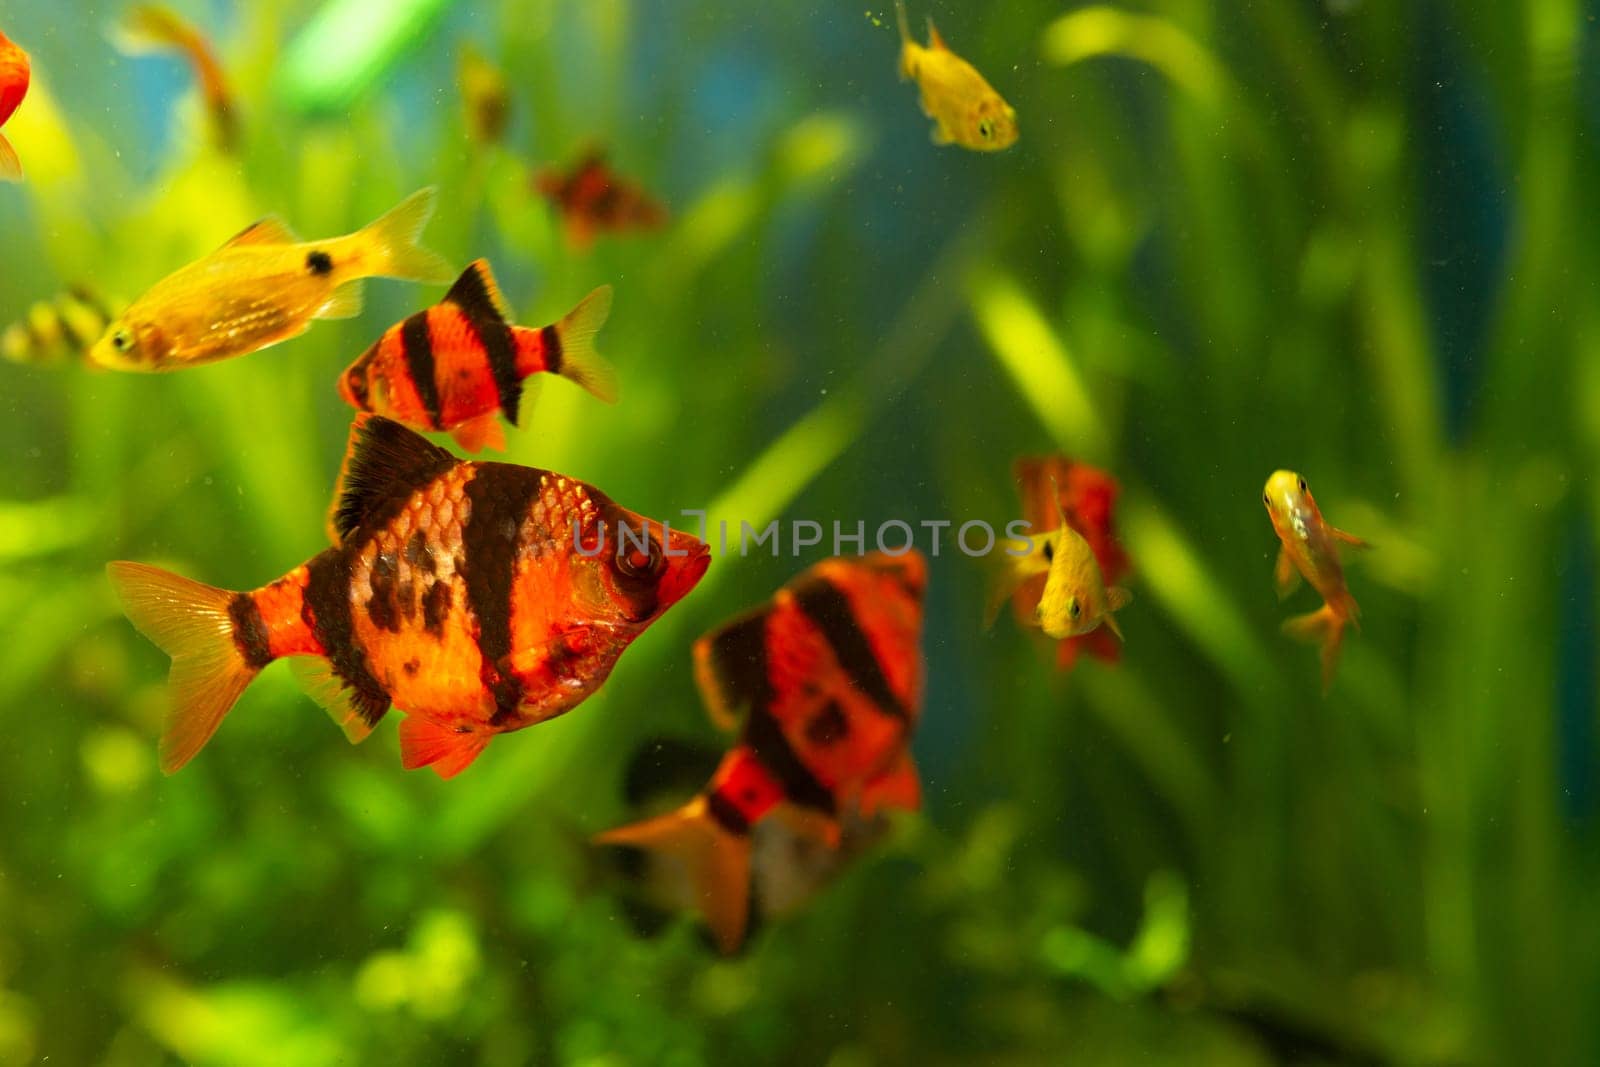 Colorful Tropical Fish Community in Planted Aquarium with Green Plants by Pukhovskiy